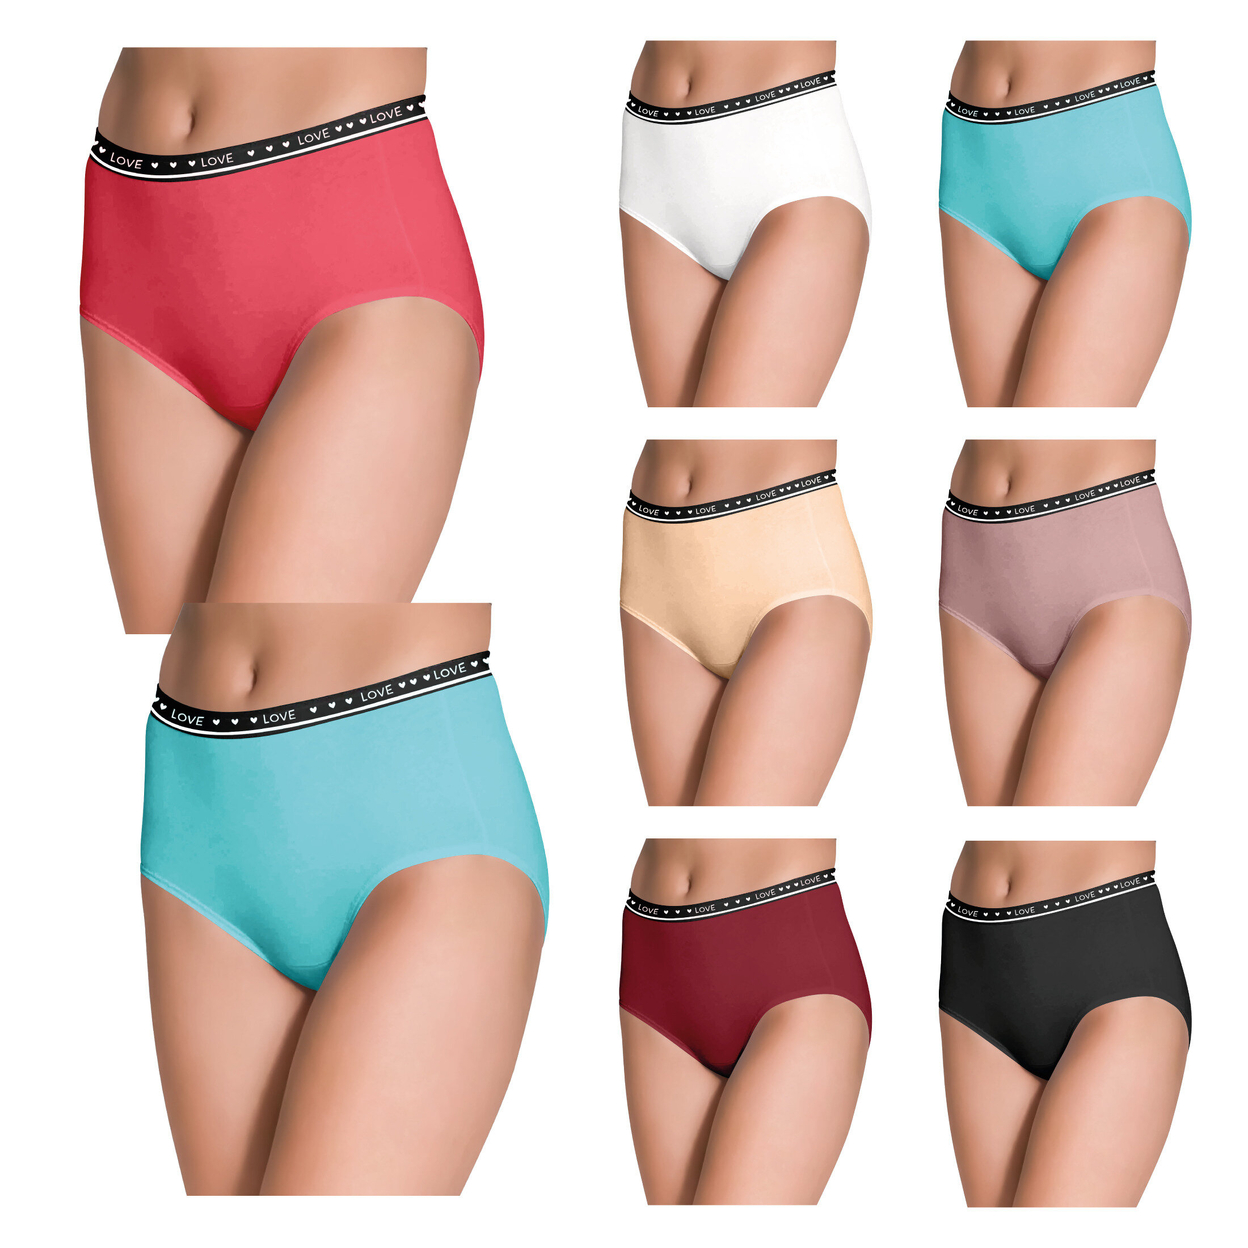 3-Pack: Women's Ultra Soft Moisture Wicking Panties Cotton Perfect Fit Underwear (Plus Sizes Available) - Small